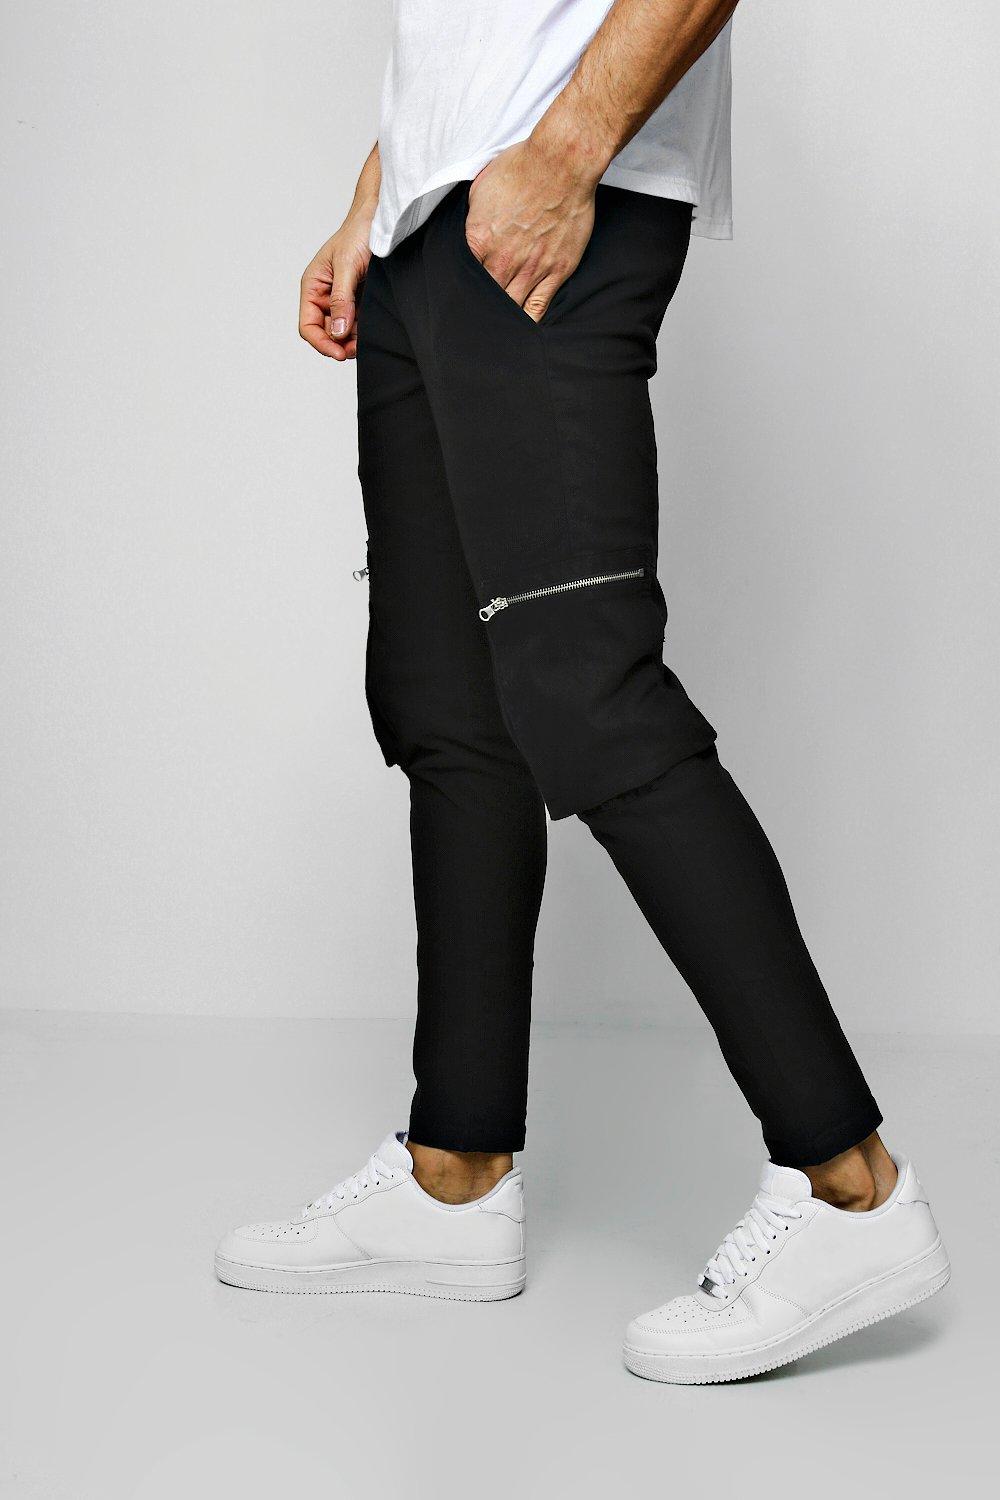 black tapered cargo pants